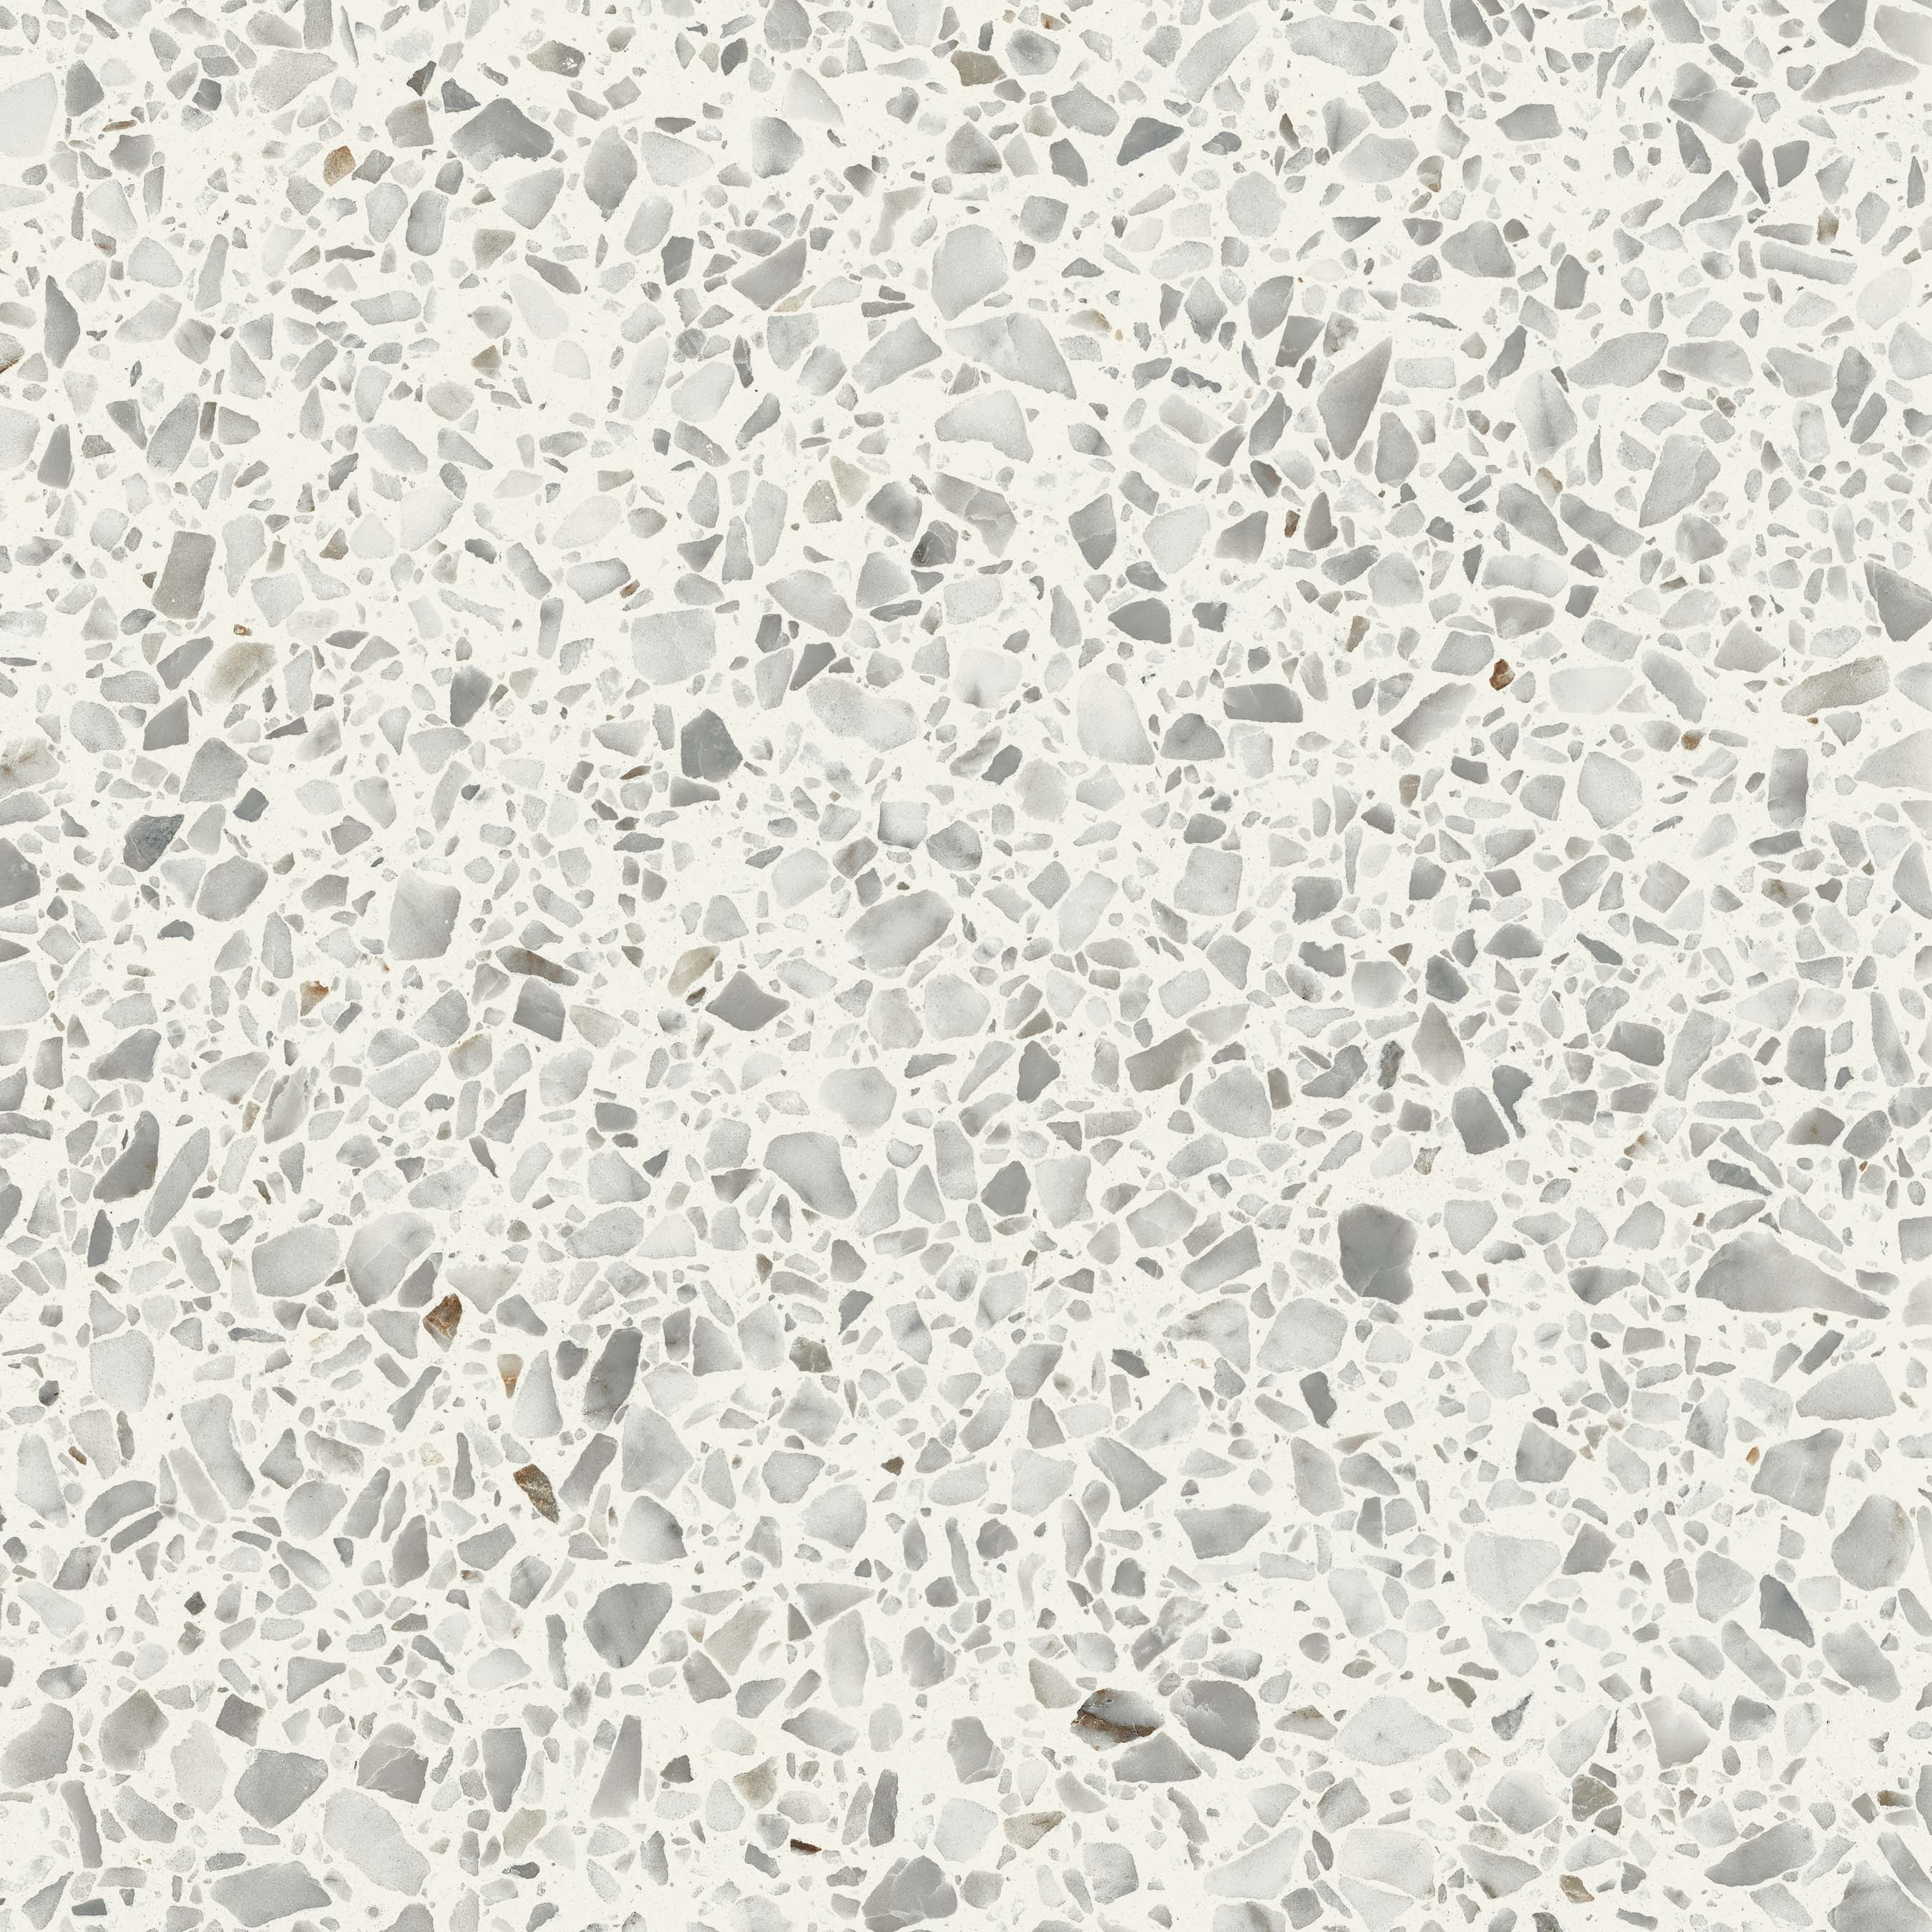 landmark frontier20 terrazzo diamond white paver tile 24x24x20mm matte rectified porcelain tile distributed by surface group international